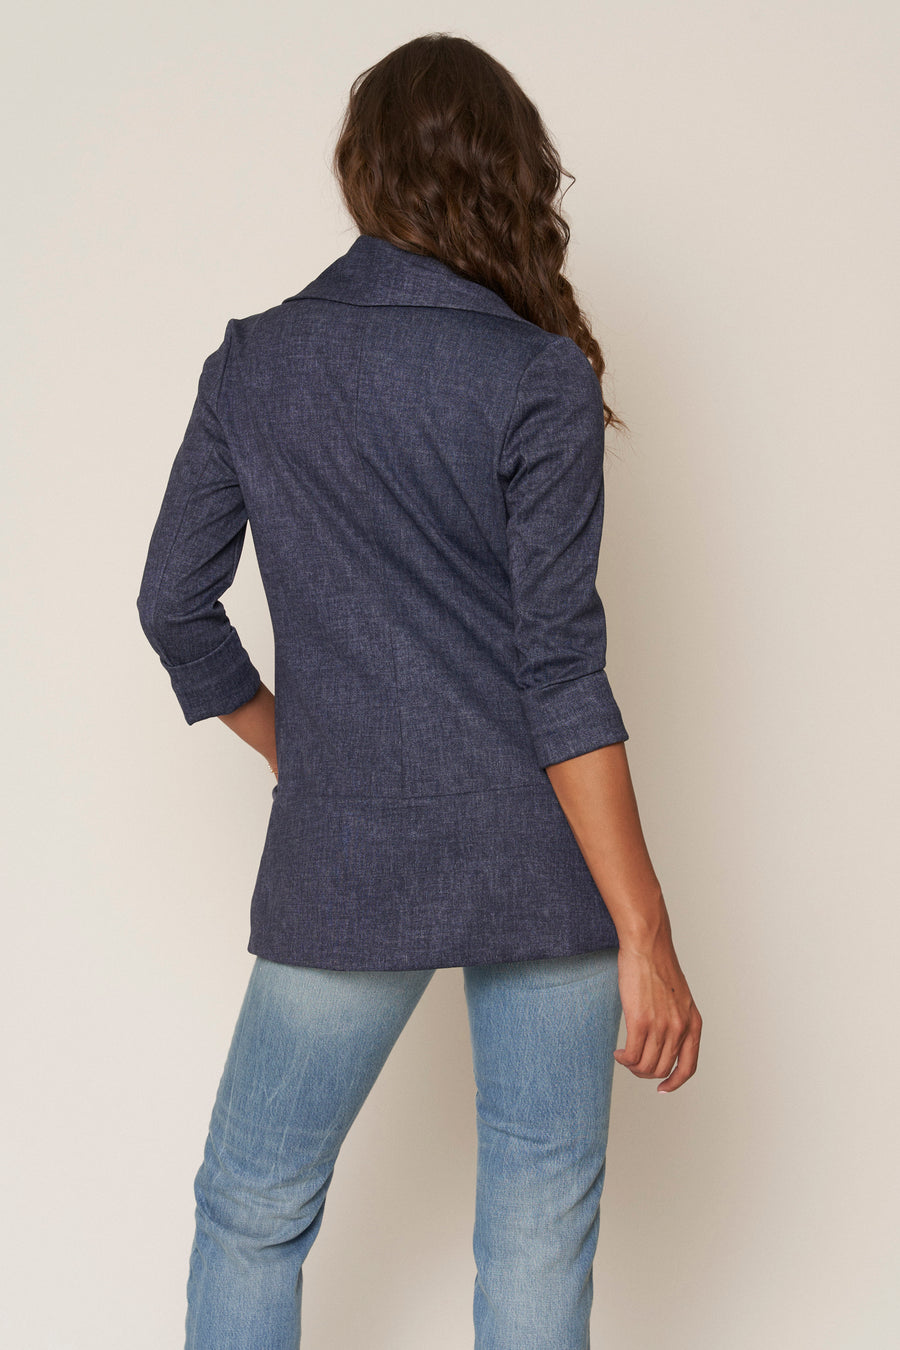 No Srcipt image - Images of 4 of 7 Classic Melanie Shawl Simple Staple Taupe Neutral Color Workwear Office Wear Women’s Outerwear Blazer Jacket Everyday Shawl Front Pockets Best Seller Customer Favorite Casual Style Everyday Jacket Indigo Denim Fabric Structured Material